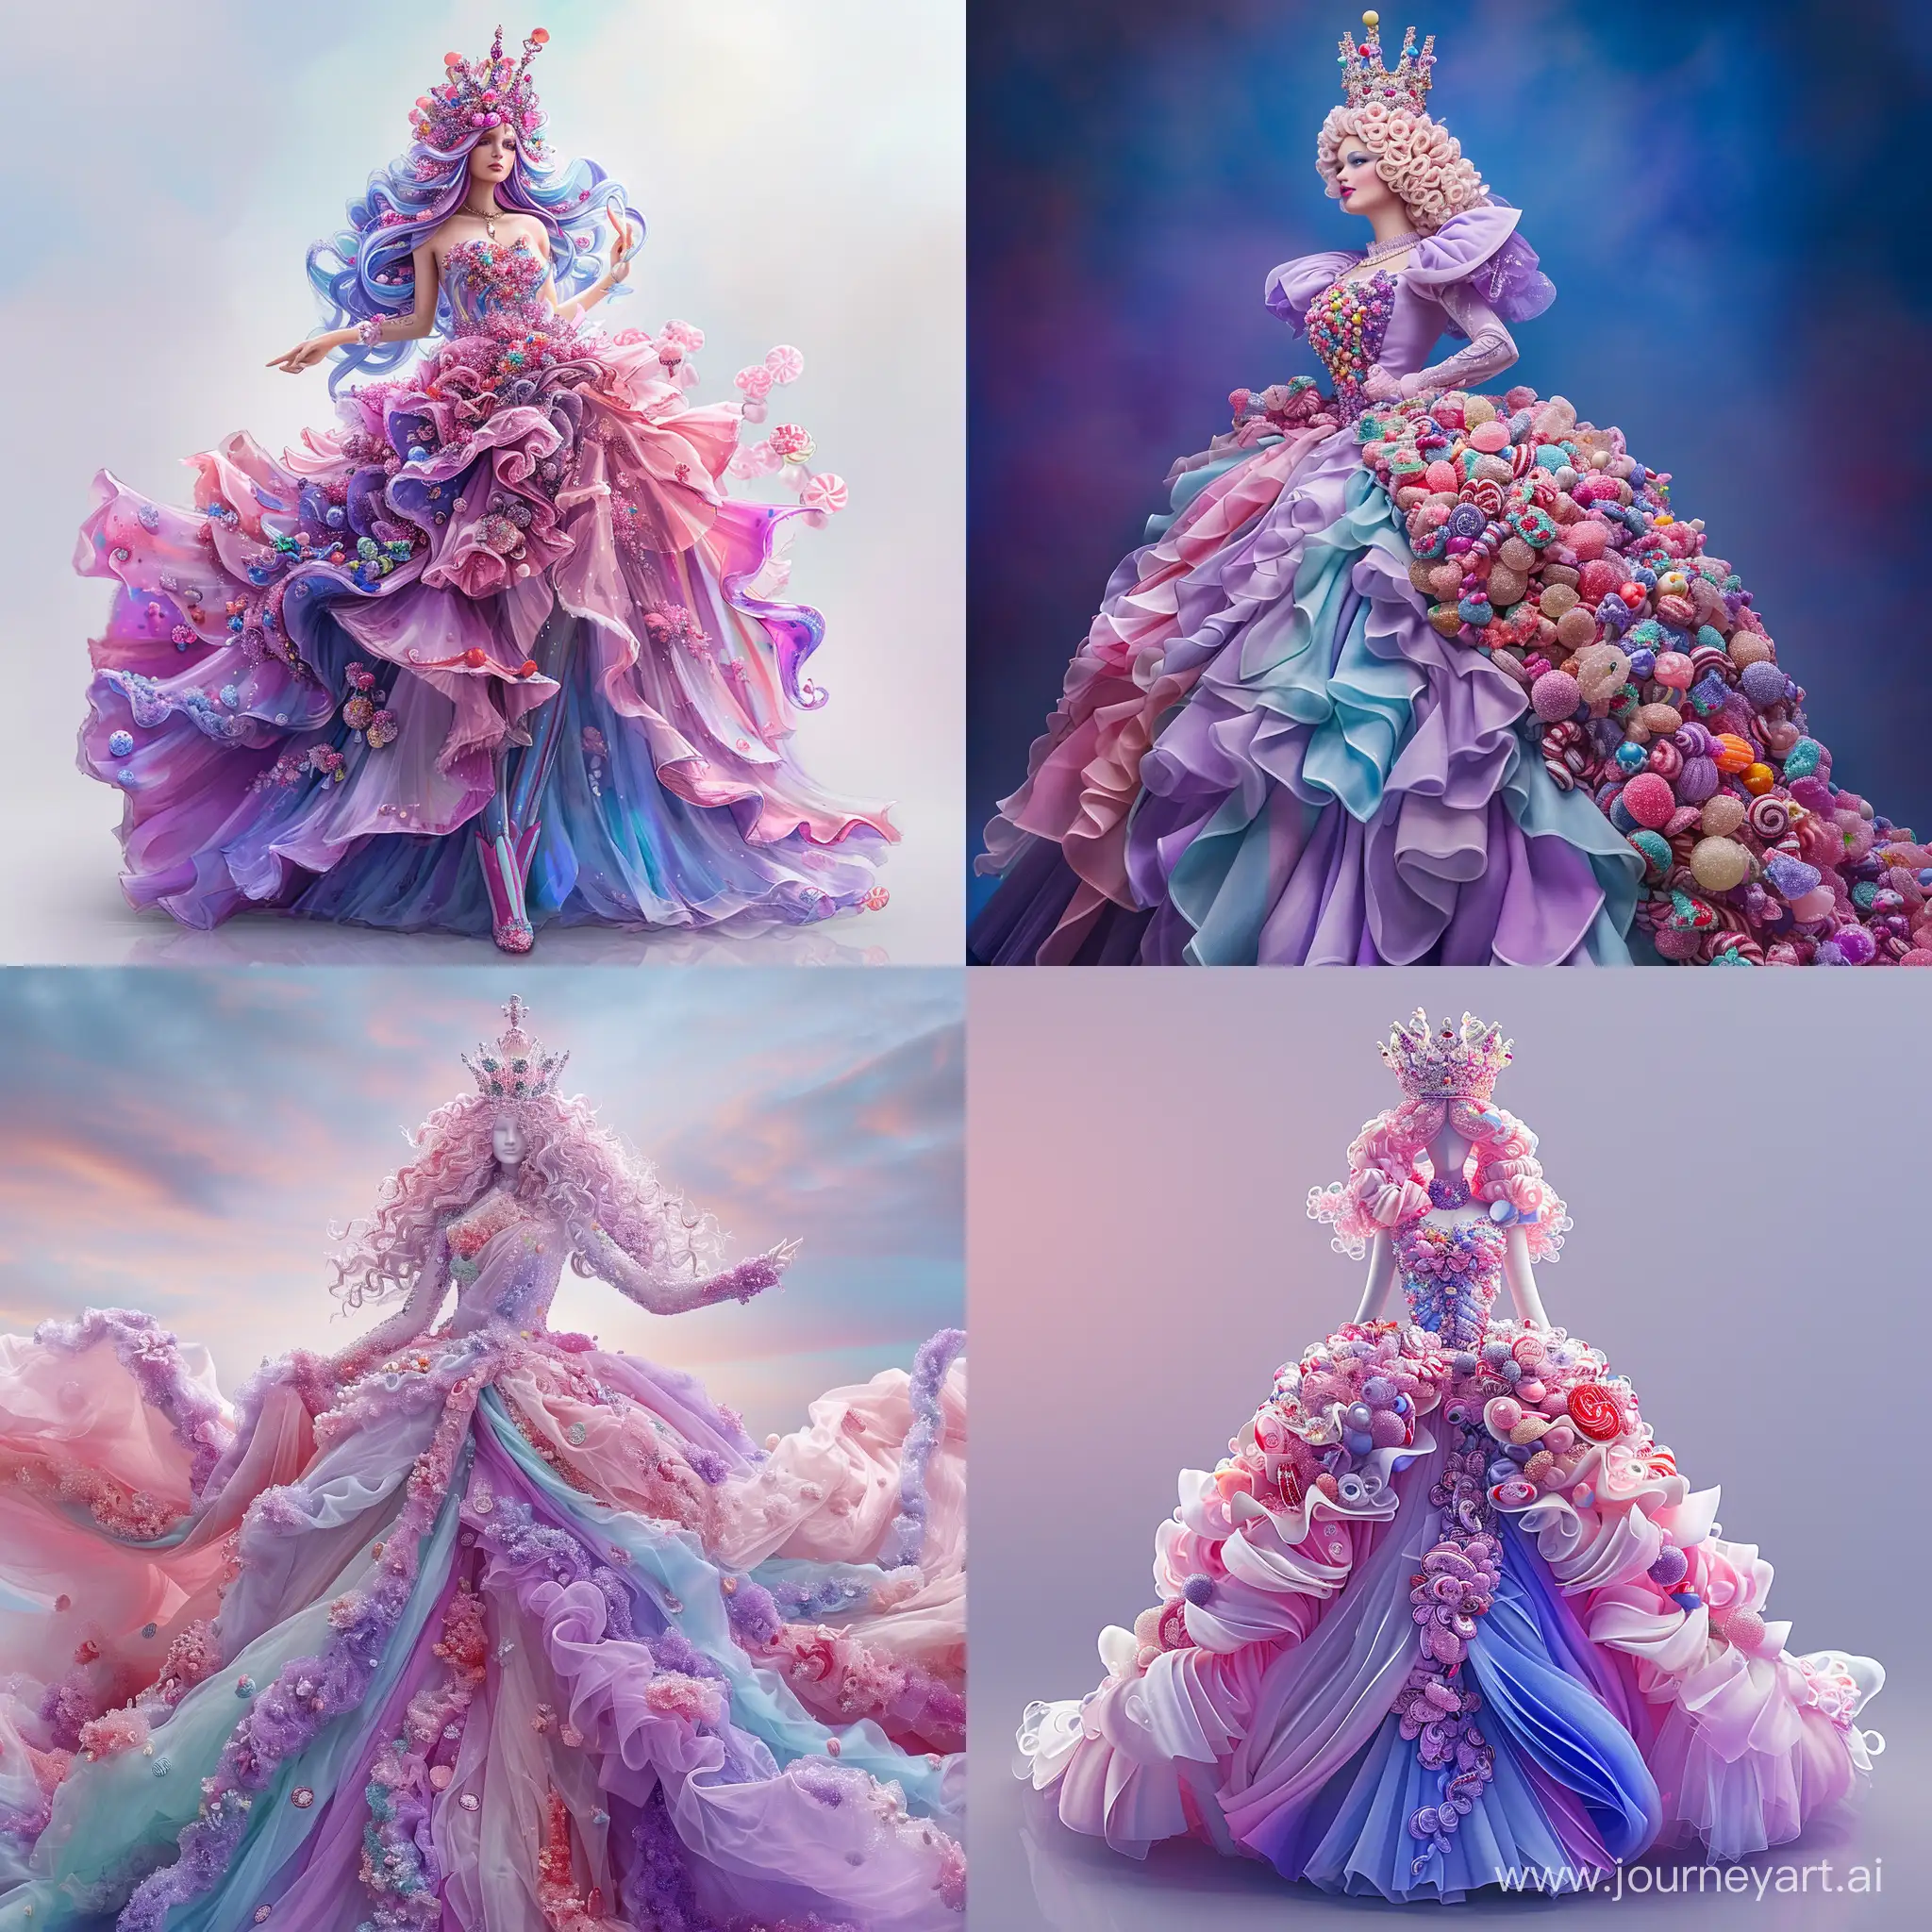 candy queen, candy country. Sweet shades of pink, purple and blue Queen radiate an irresistible sweetness, the elegance of a queen, from an exquisitely decorated crown to a flowing dress filled with candy, exudes a sense of impeccable craftsmanship